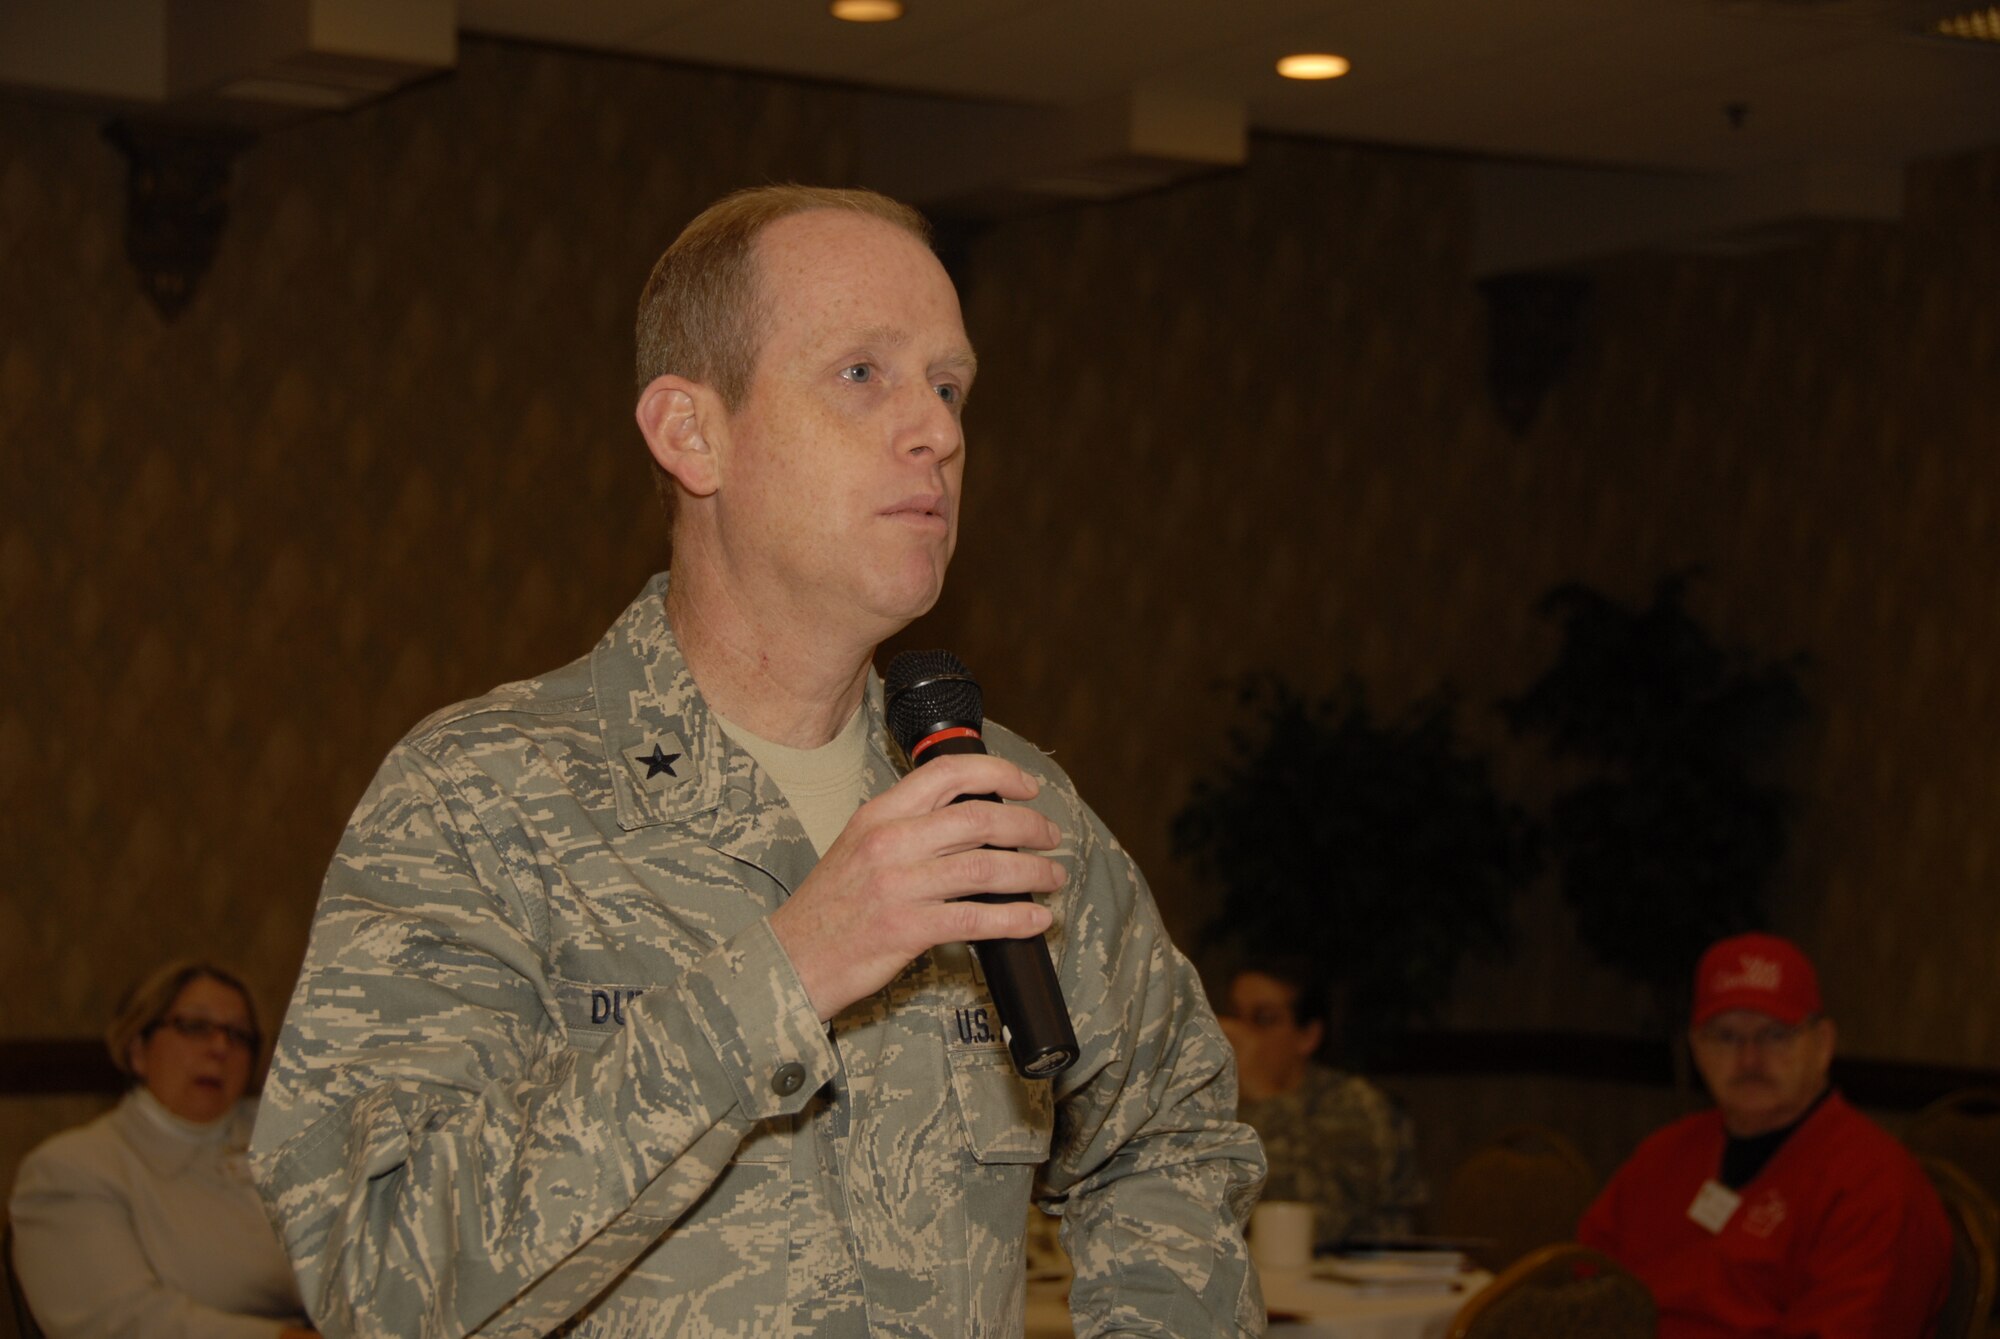 Brigadier General Donald Dunbar, Wisconsin Adjutant General, speaks at the "Community Resiliency: A Coordinated Effort" event Jan. 13 at the Inn on the Park in downtown Madison. The event was a way for the many different servicemember and family support agencies to unite under the new Service Member Support Branch which aims to provide enhance support to military members and their families. (U.S. Air Force Photo by Master. Sgt. Dan Richardson)